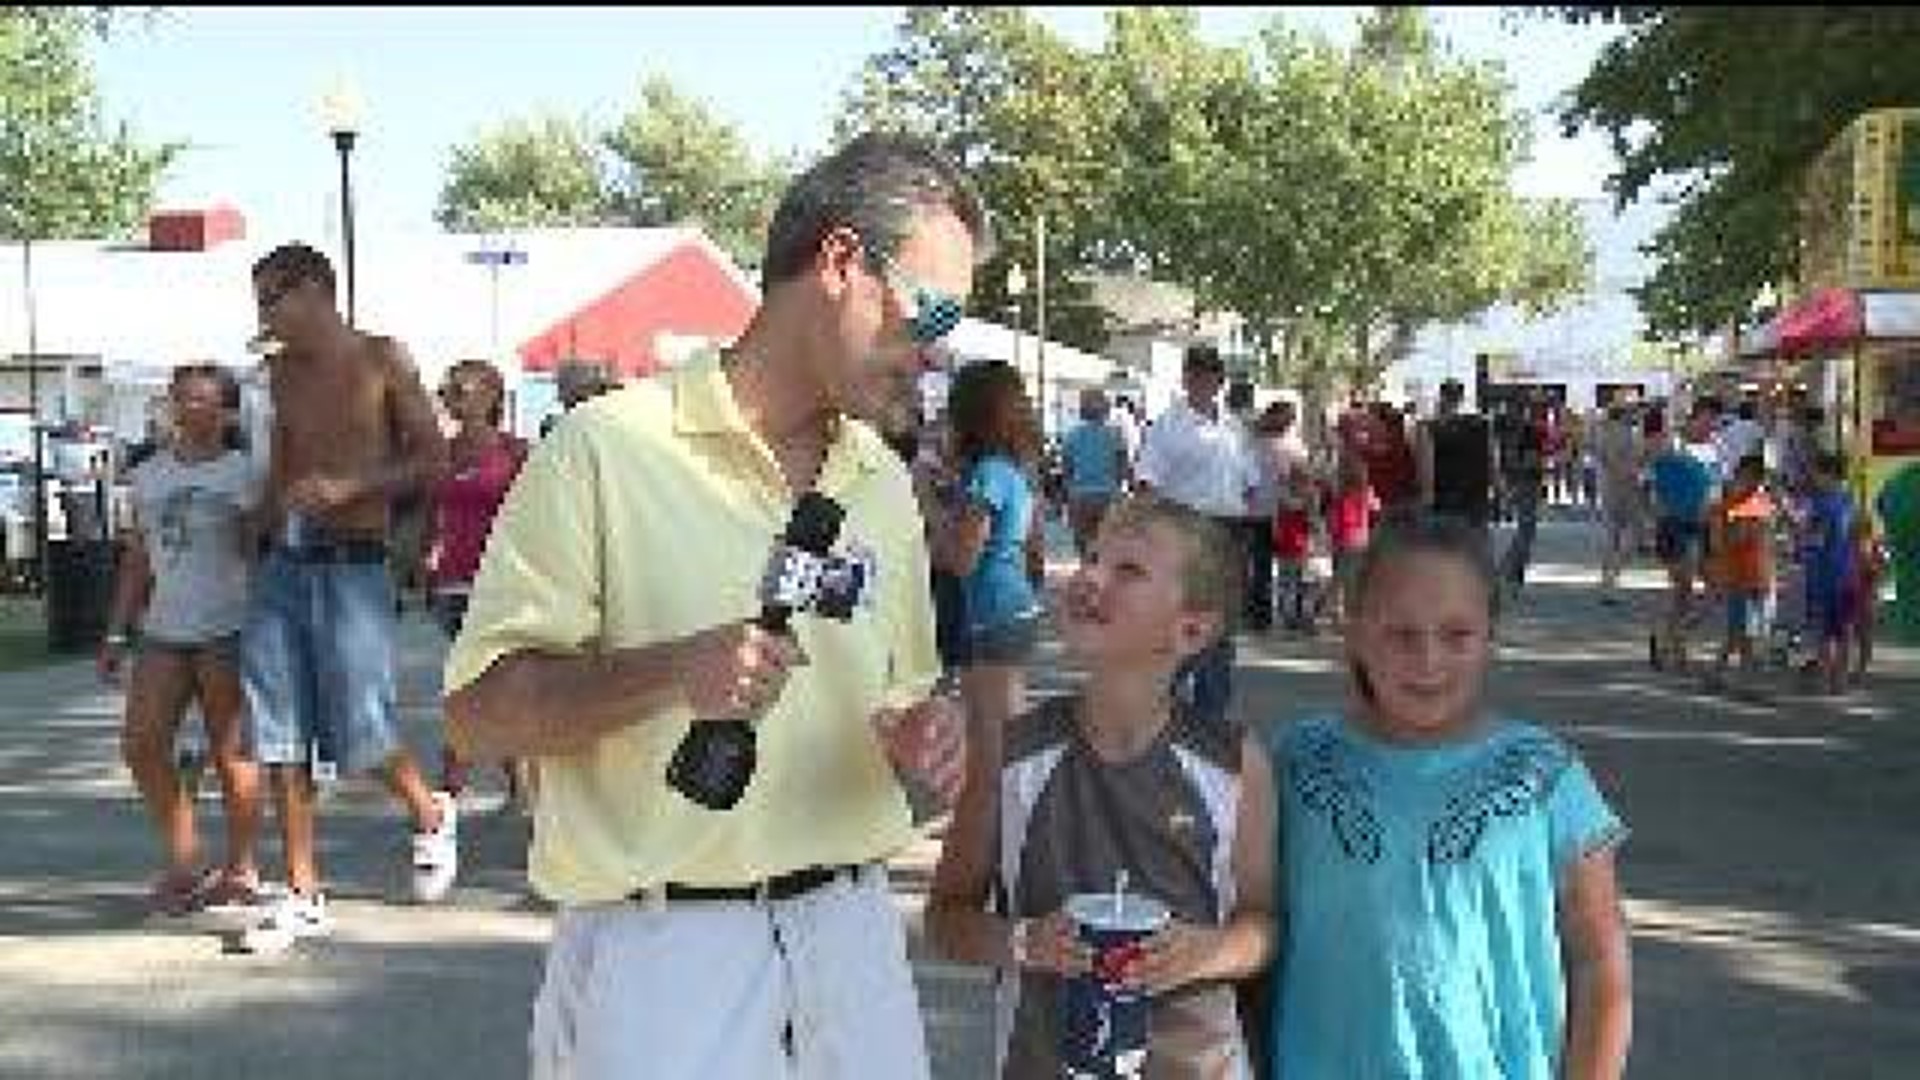 Terry interviews Cooper and Haley at the fair